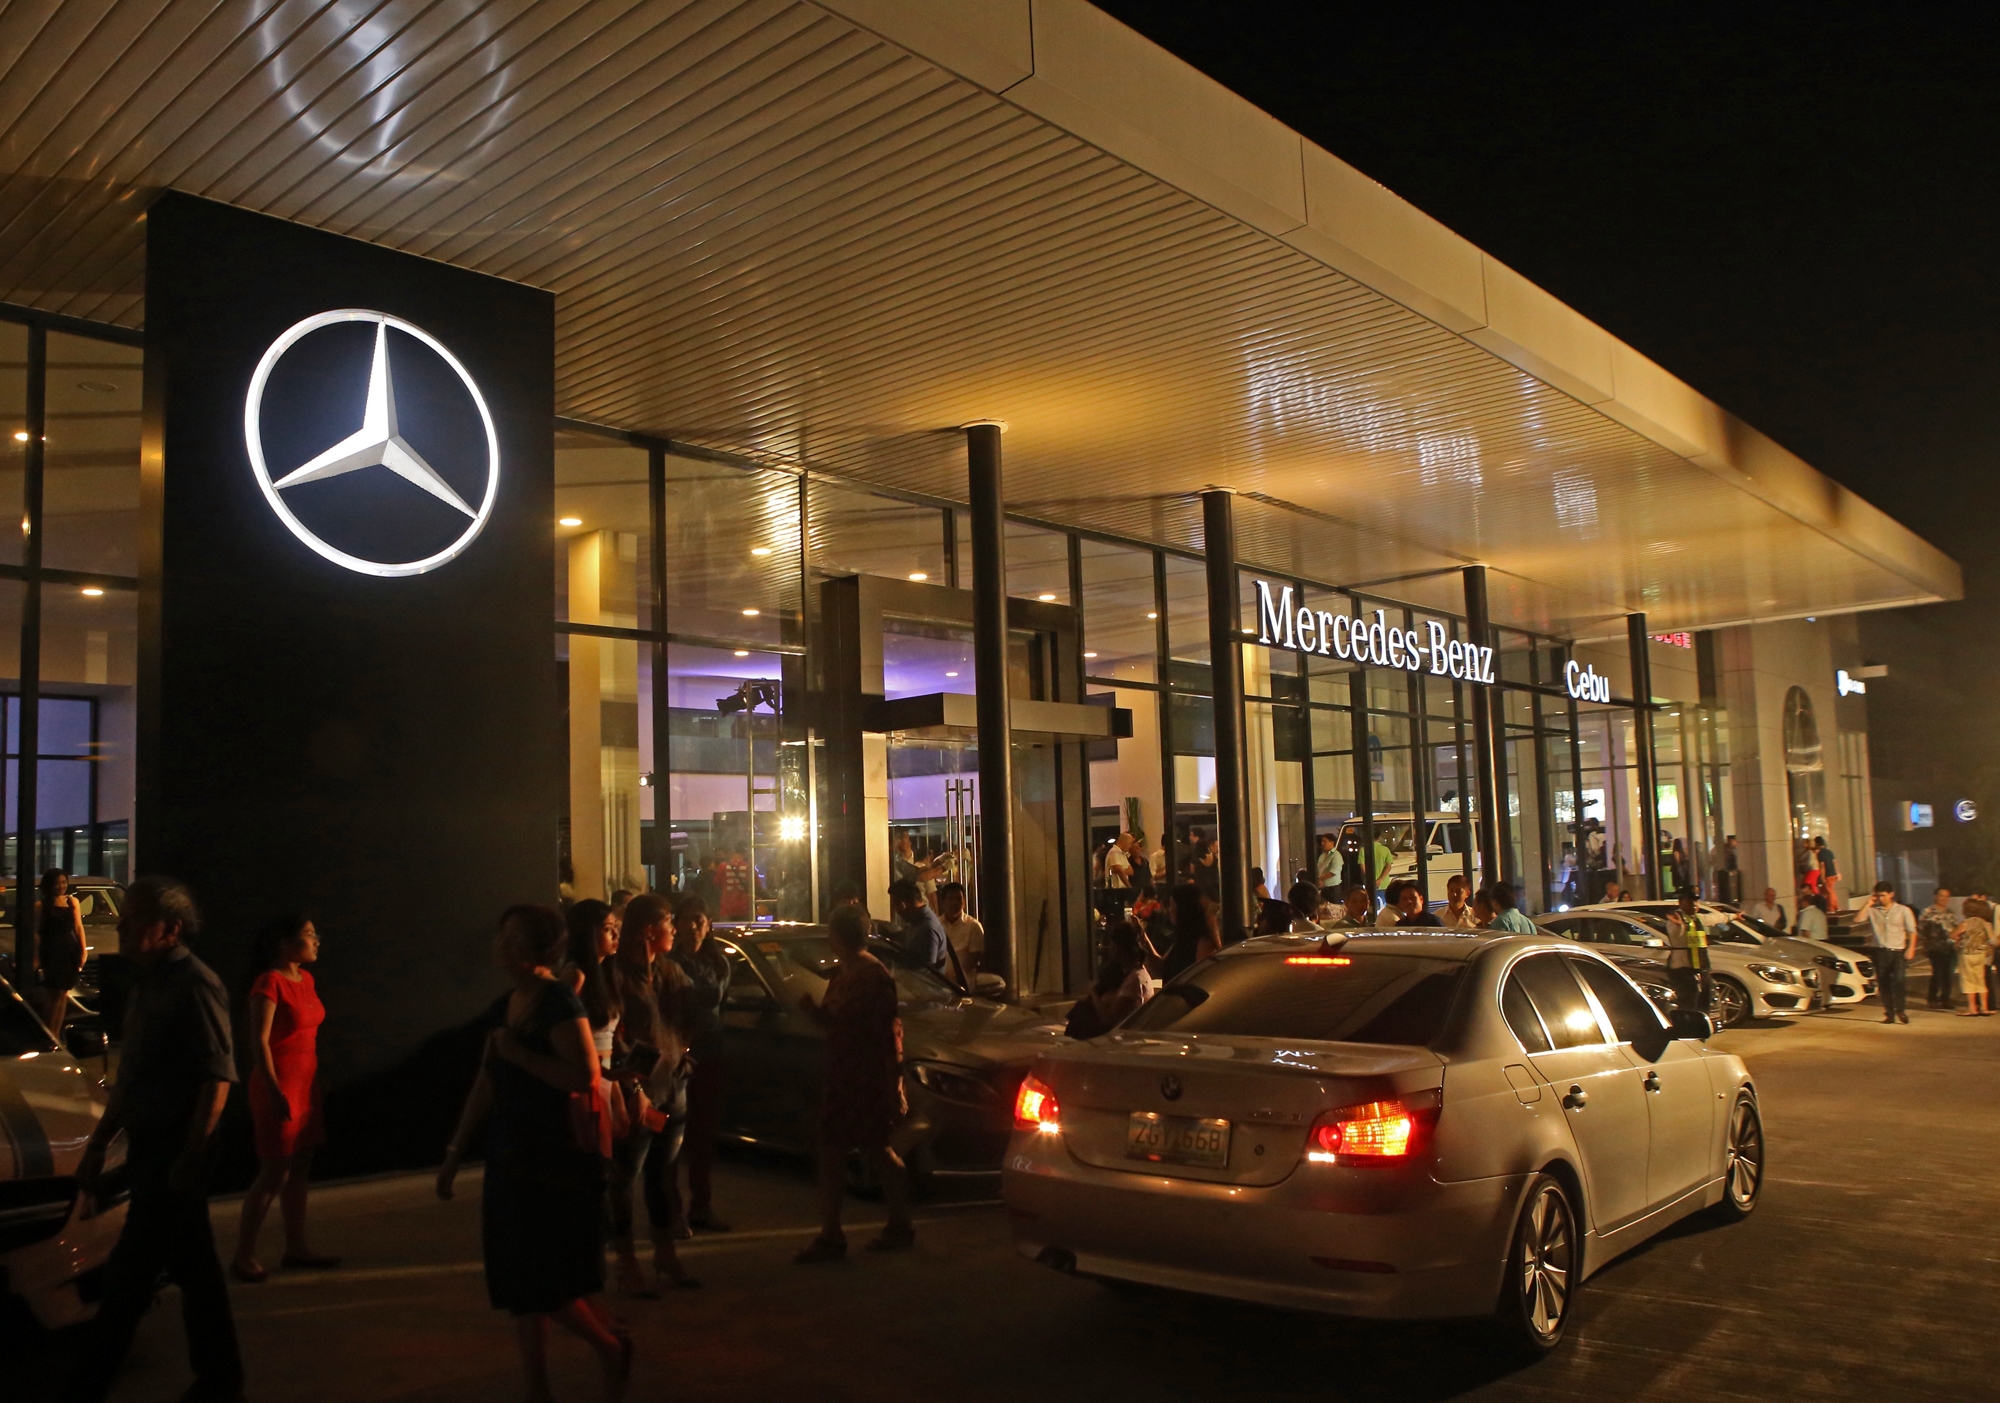  The Global Star showroom and service center in Nivel Hills for Mercedes-Benz and Chrysler Group cars is now open.(CDN PHOTO/LITO TECSON)